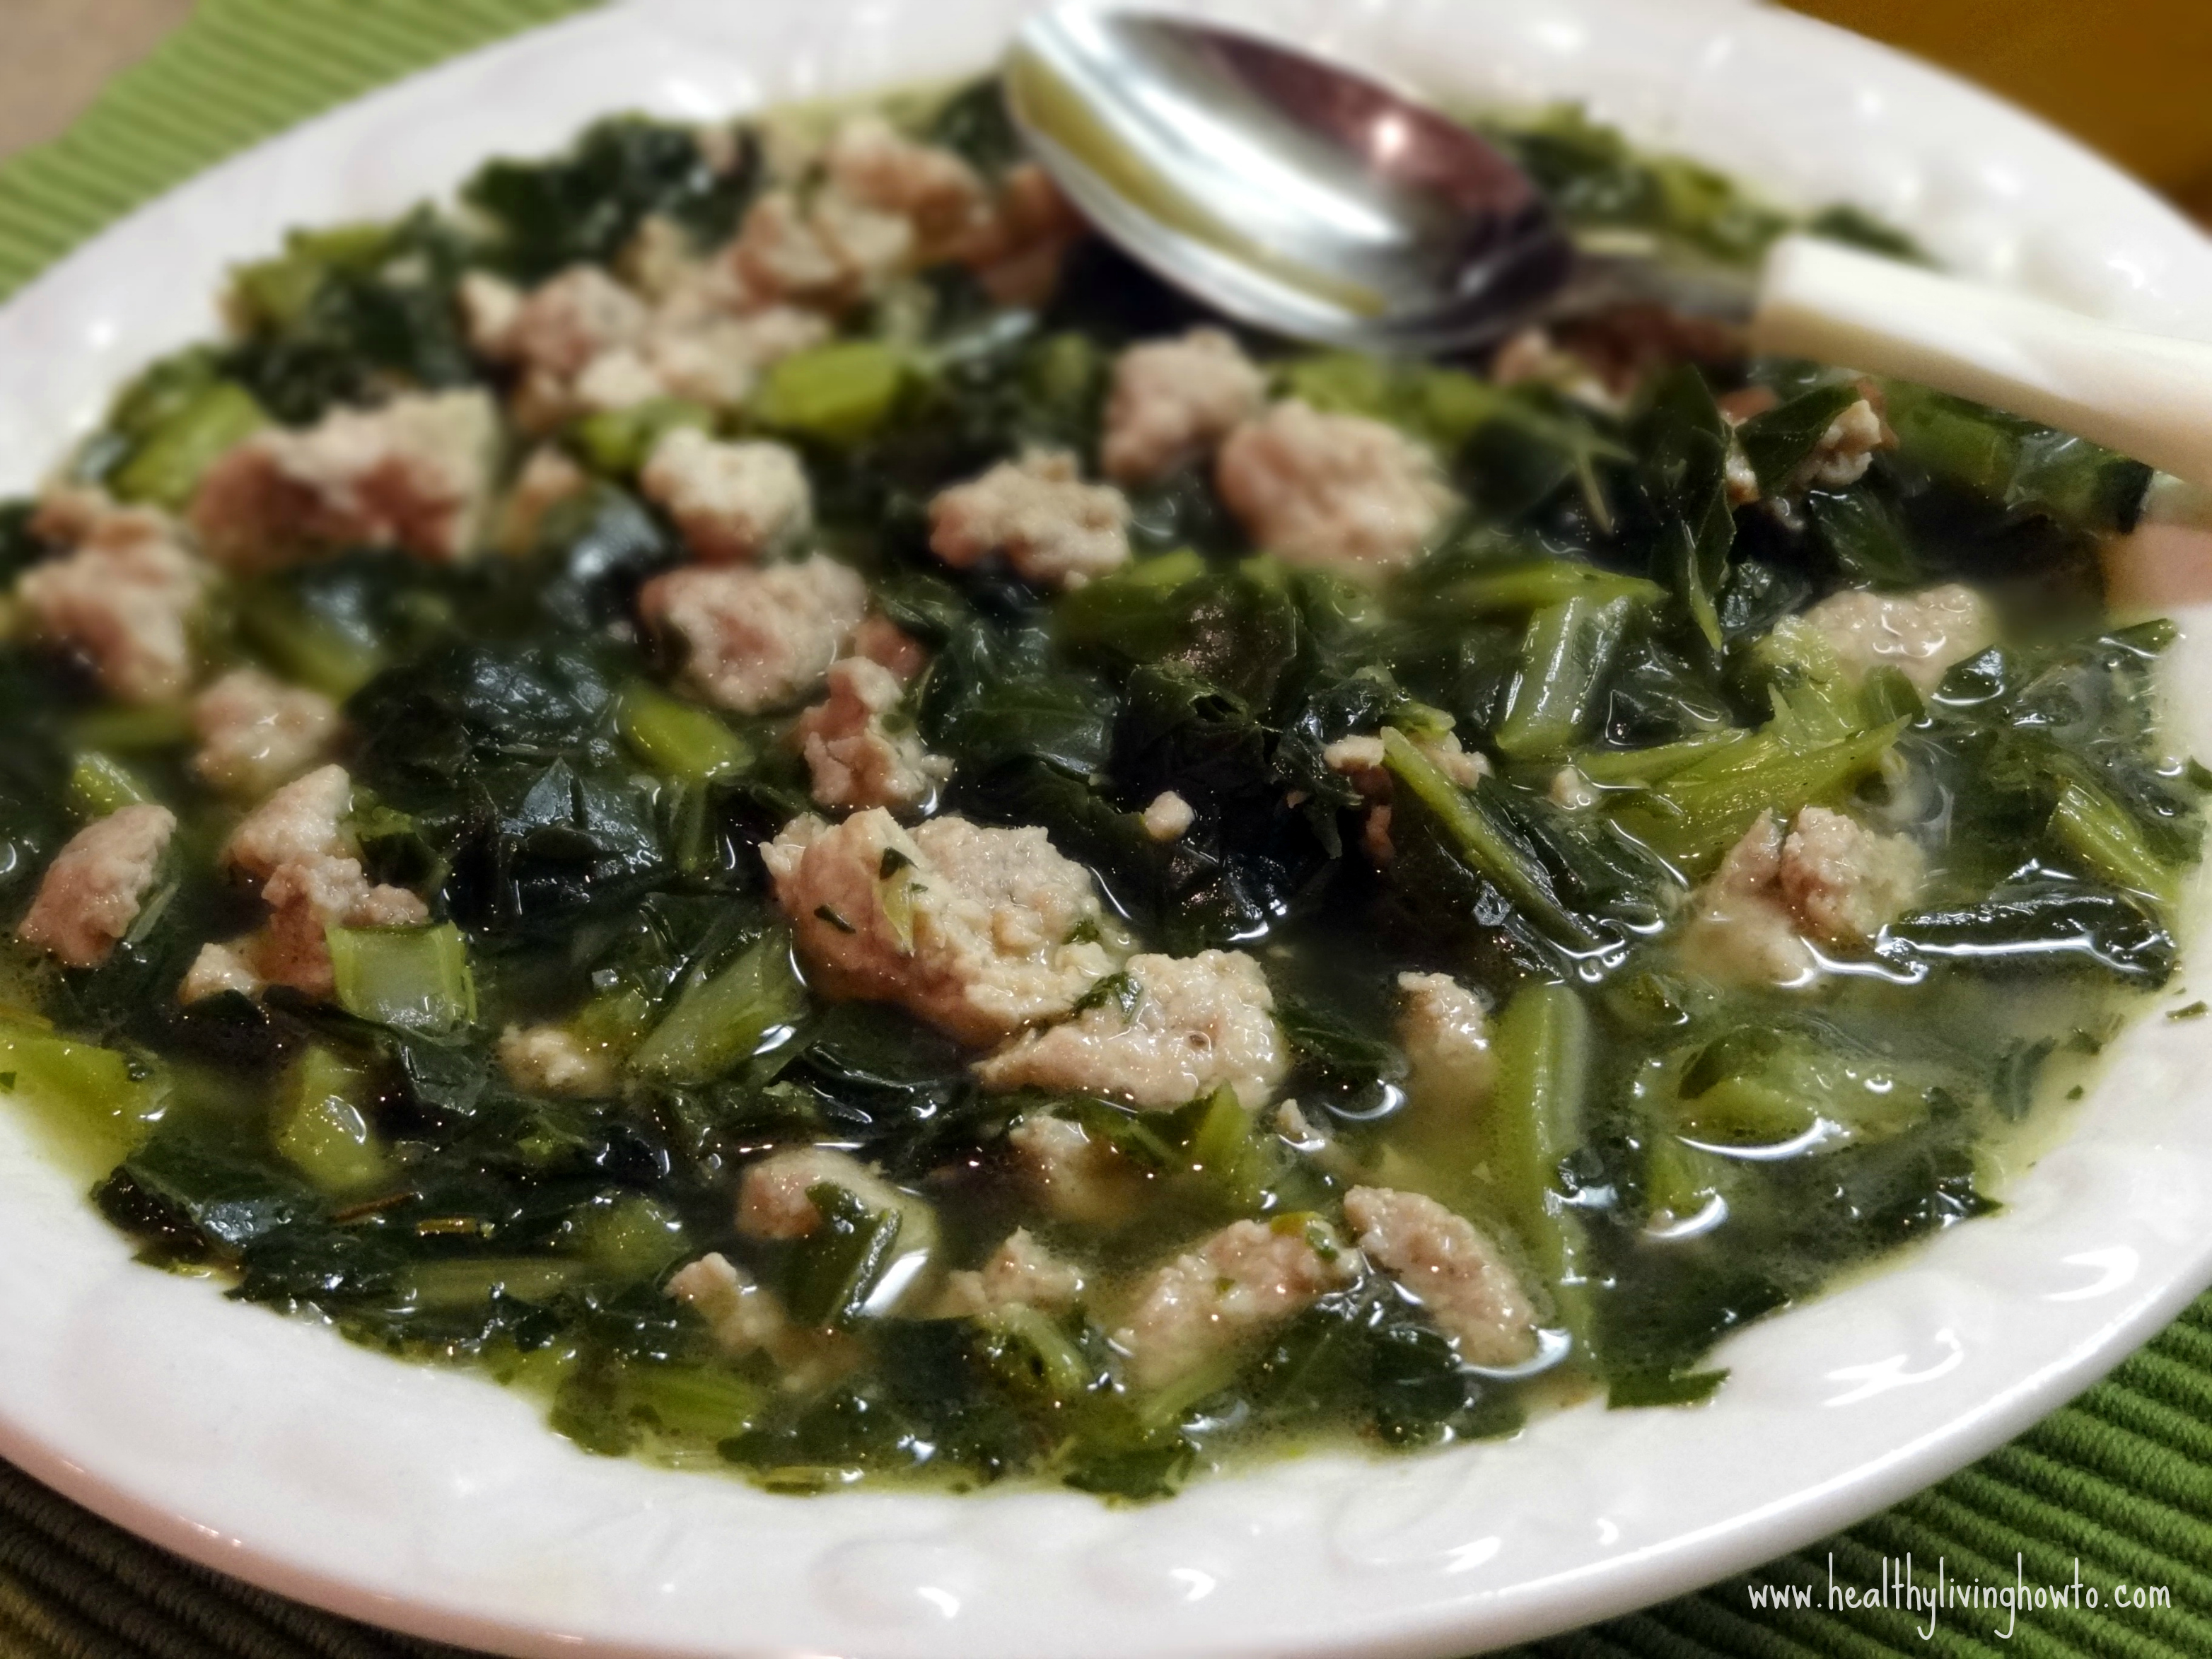 Turkey & Collard Greens Soup - Healthy Living How To